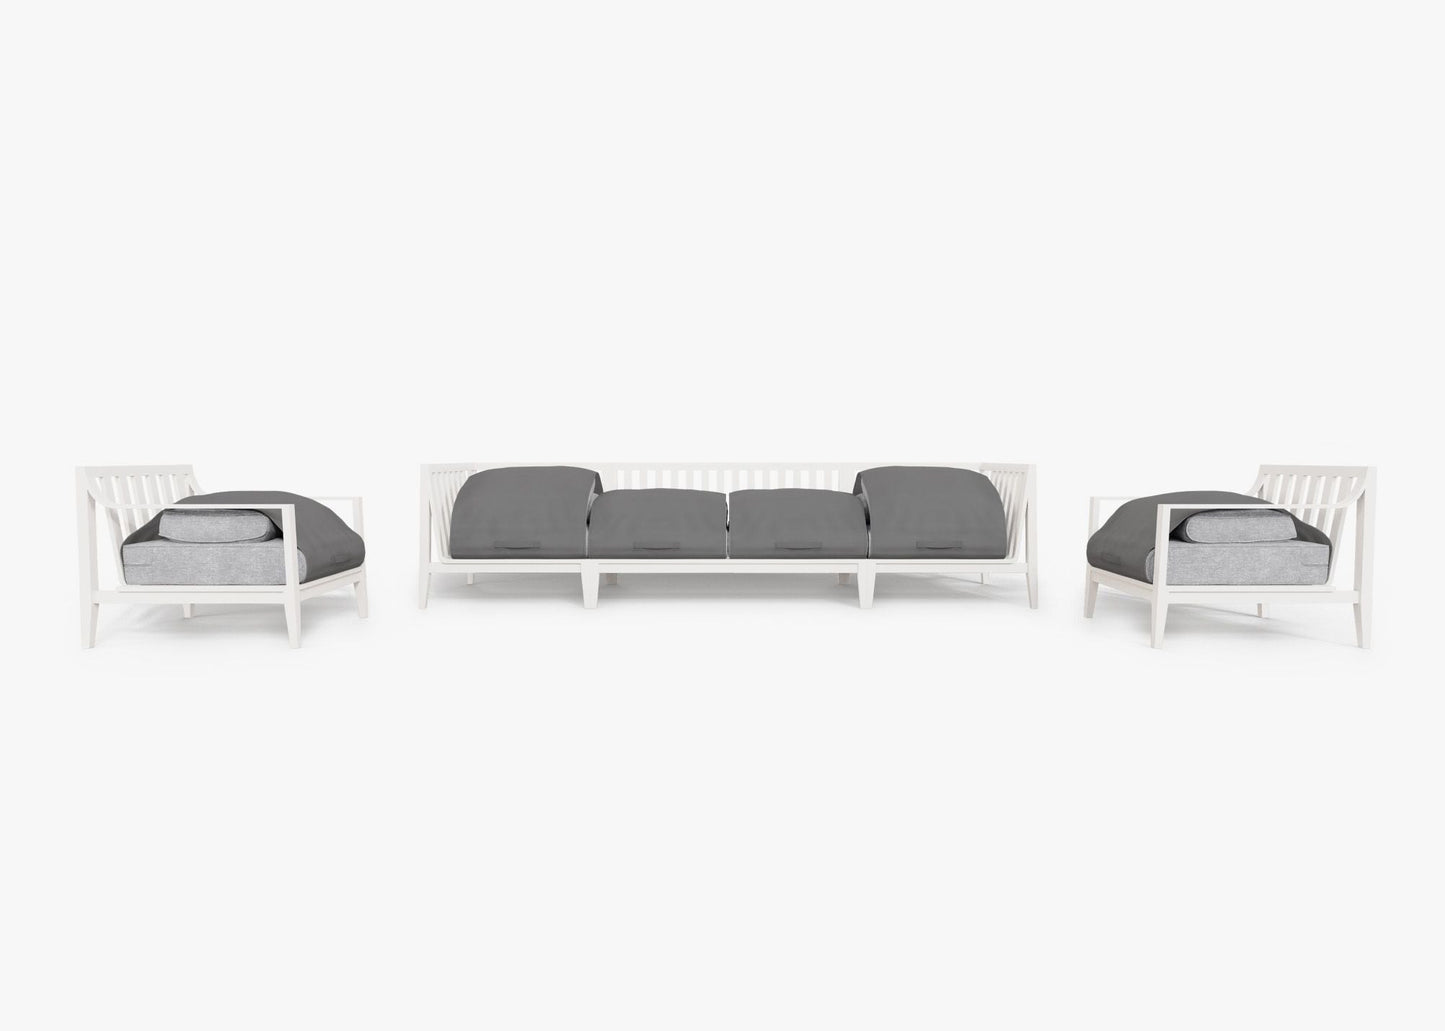 Live Outer 127" White Aluminum Outdoor Sofa With Armchairs and Pacific Fog Gray Cushion (6-Seat)